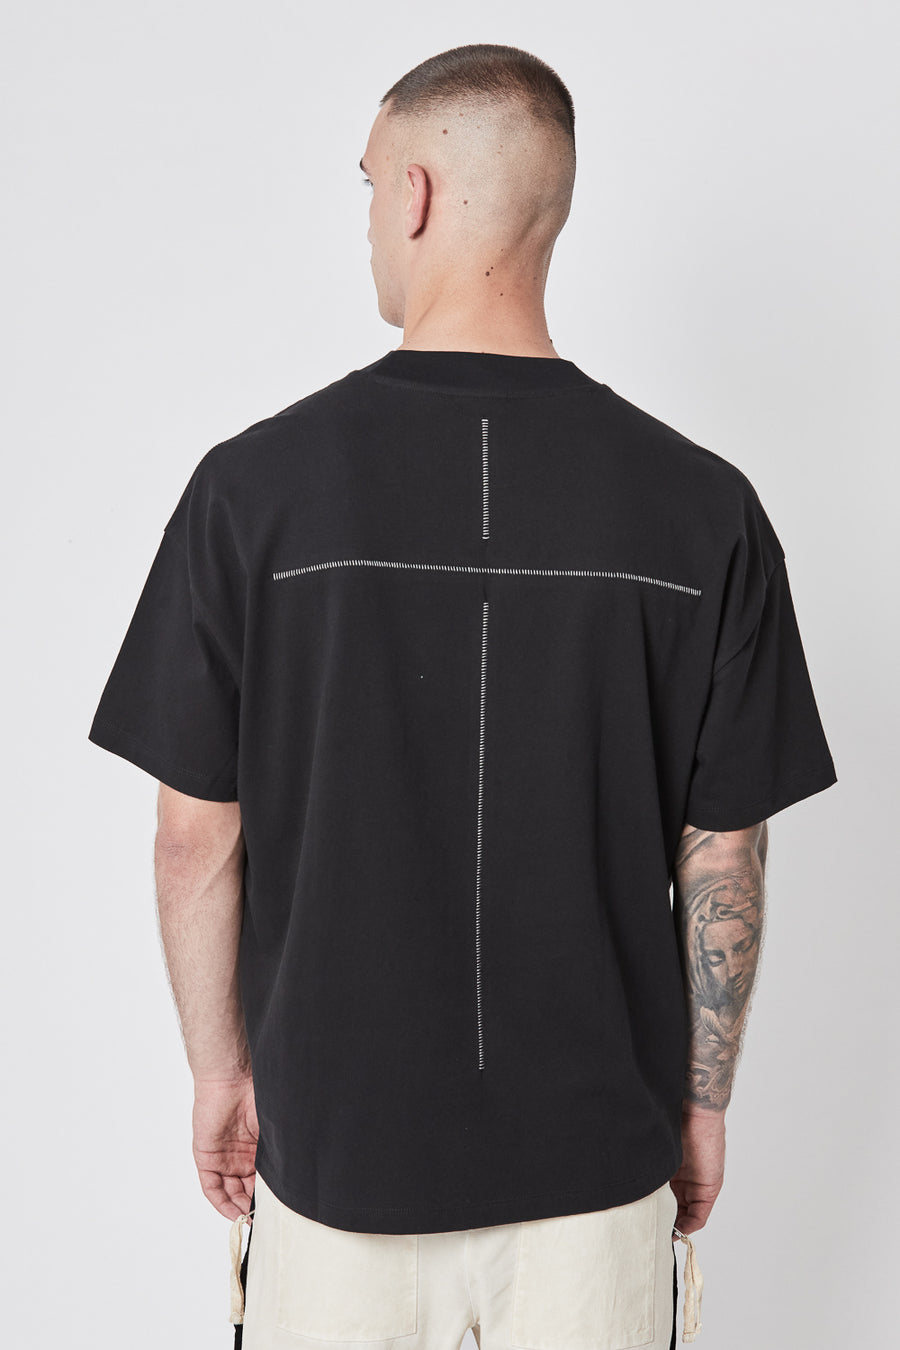 Buy the Thom Krom M TS 717 T-Shirt in Black at Intro. Spend £50 for free UK delivery. Official stockists. We ship worldwide.